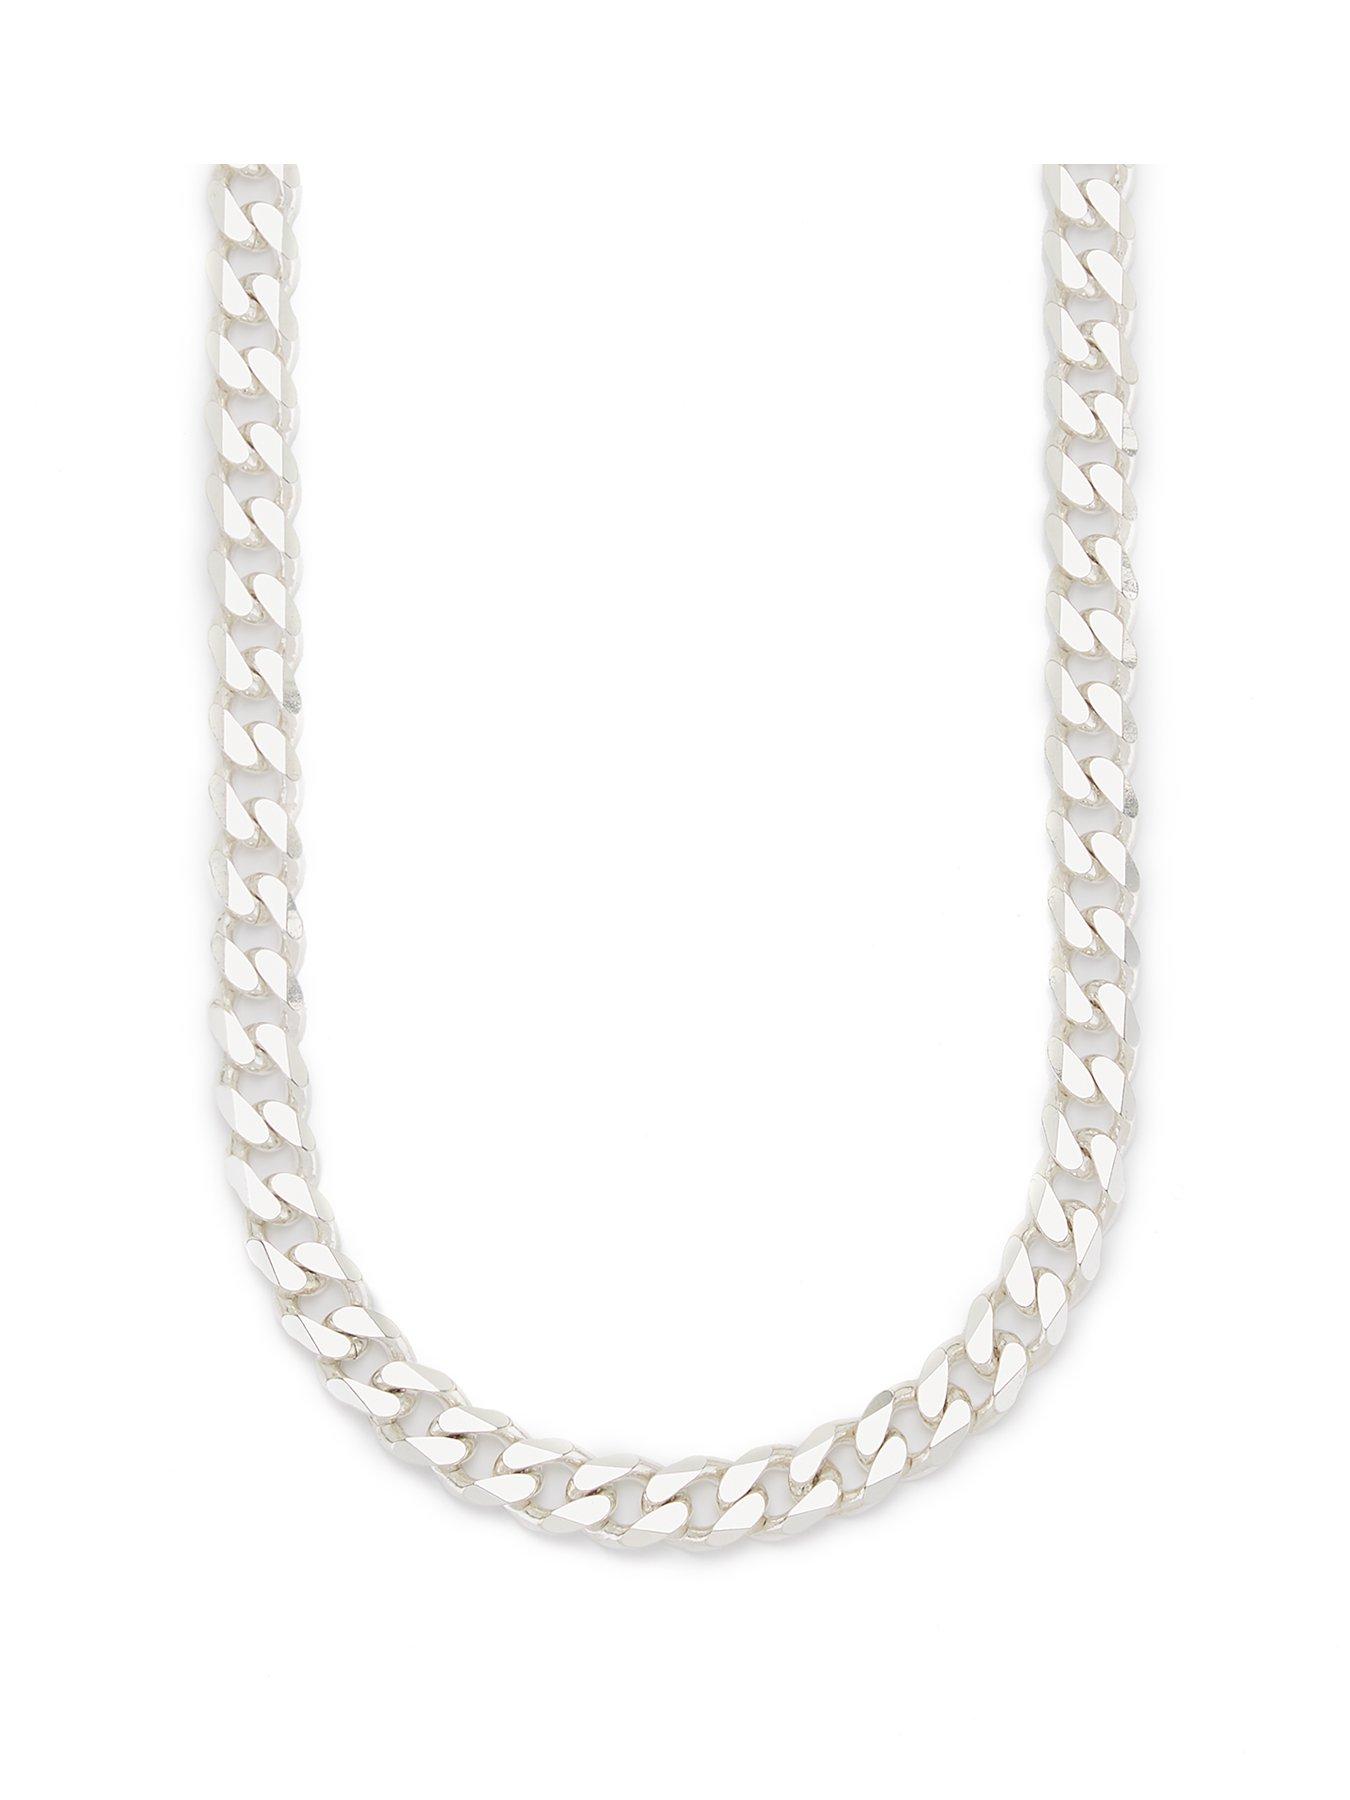 Heavy Silver Necklace Chain | Unisex Sterling Rounded Box Chain - 24